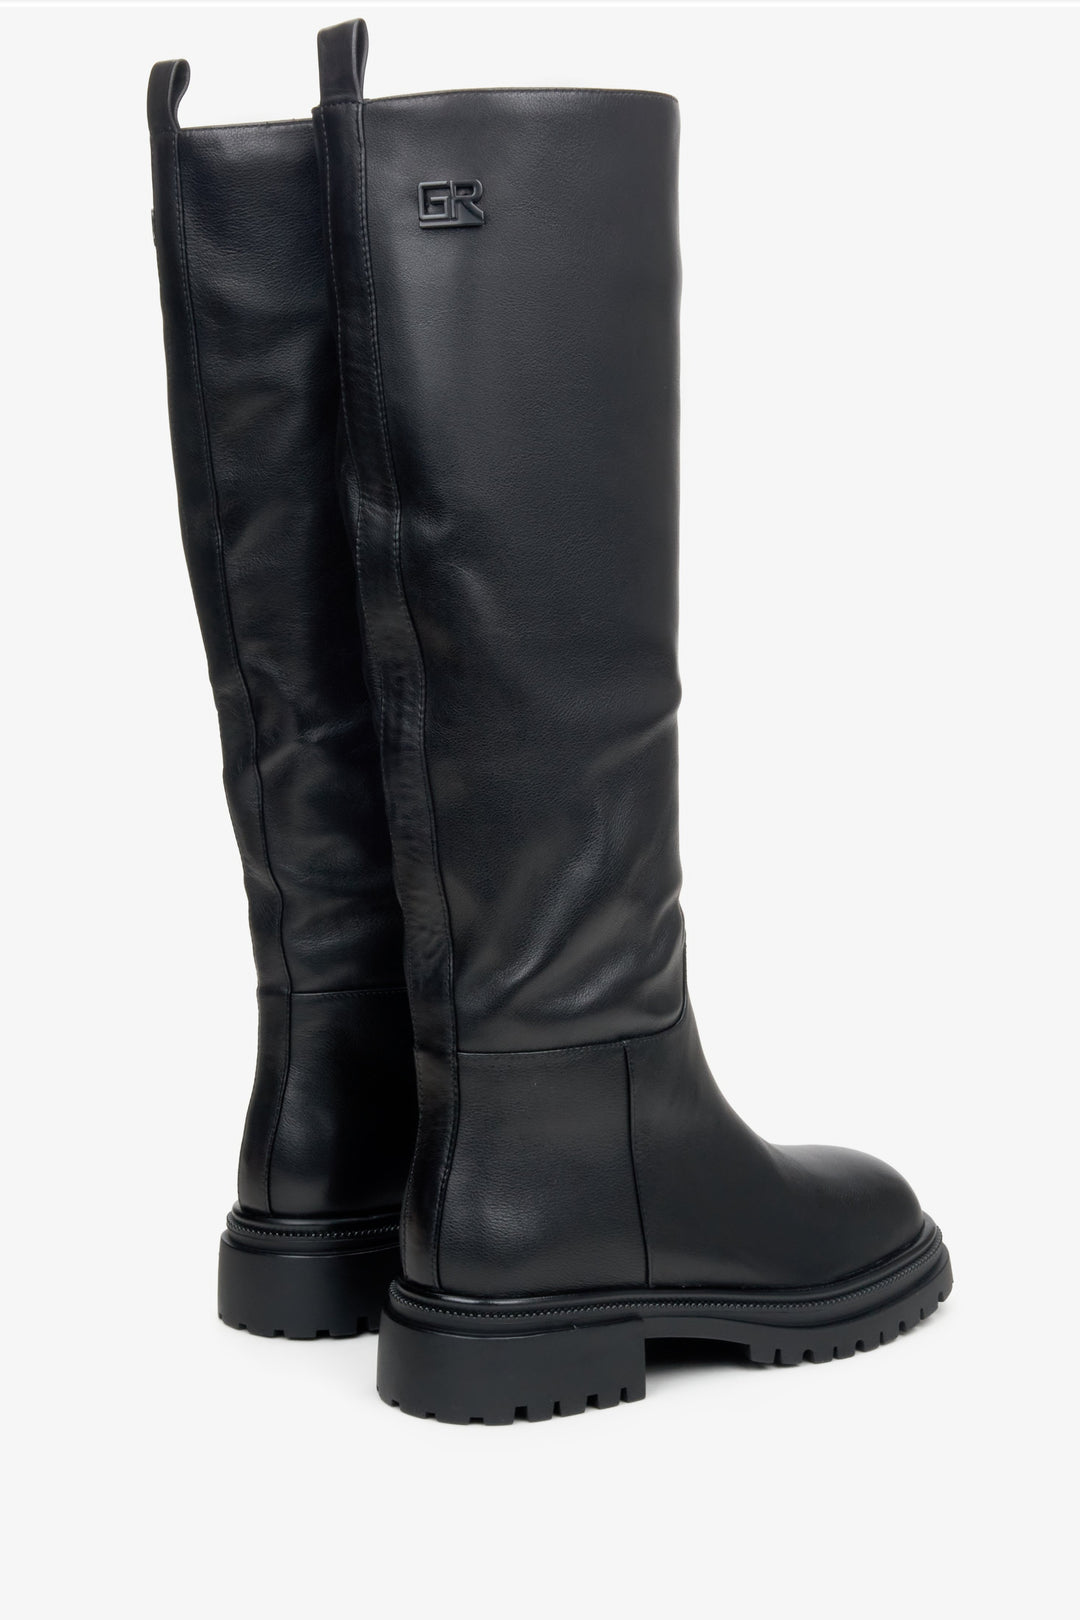 Women's boots with a wide shaft in black. Estro - heel counter and side profile of the shoe.